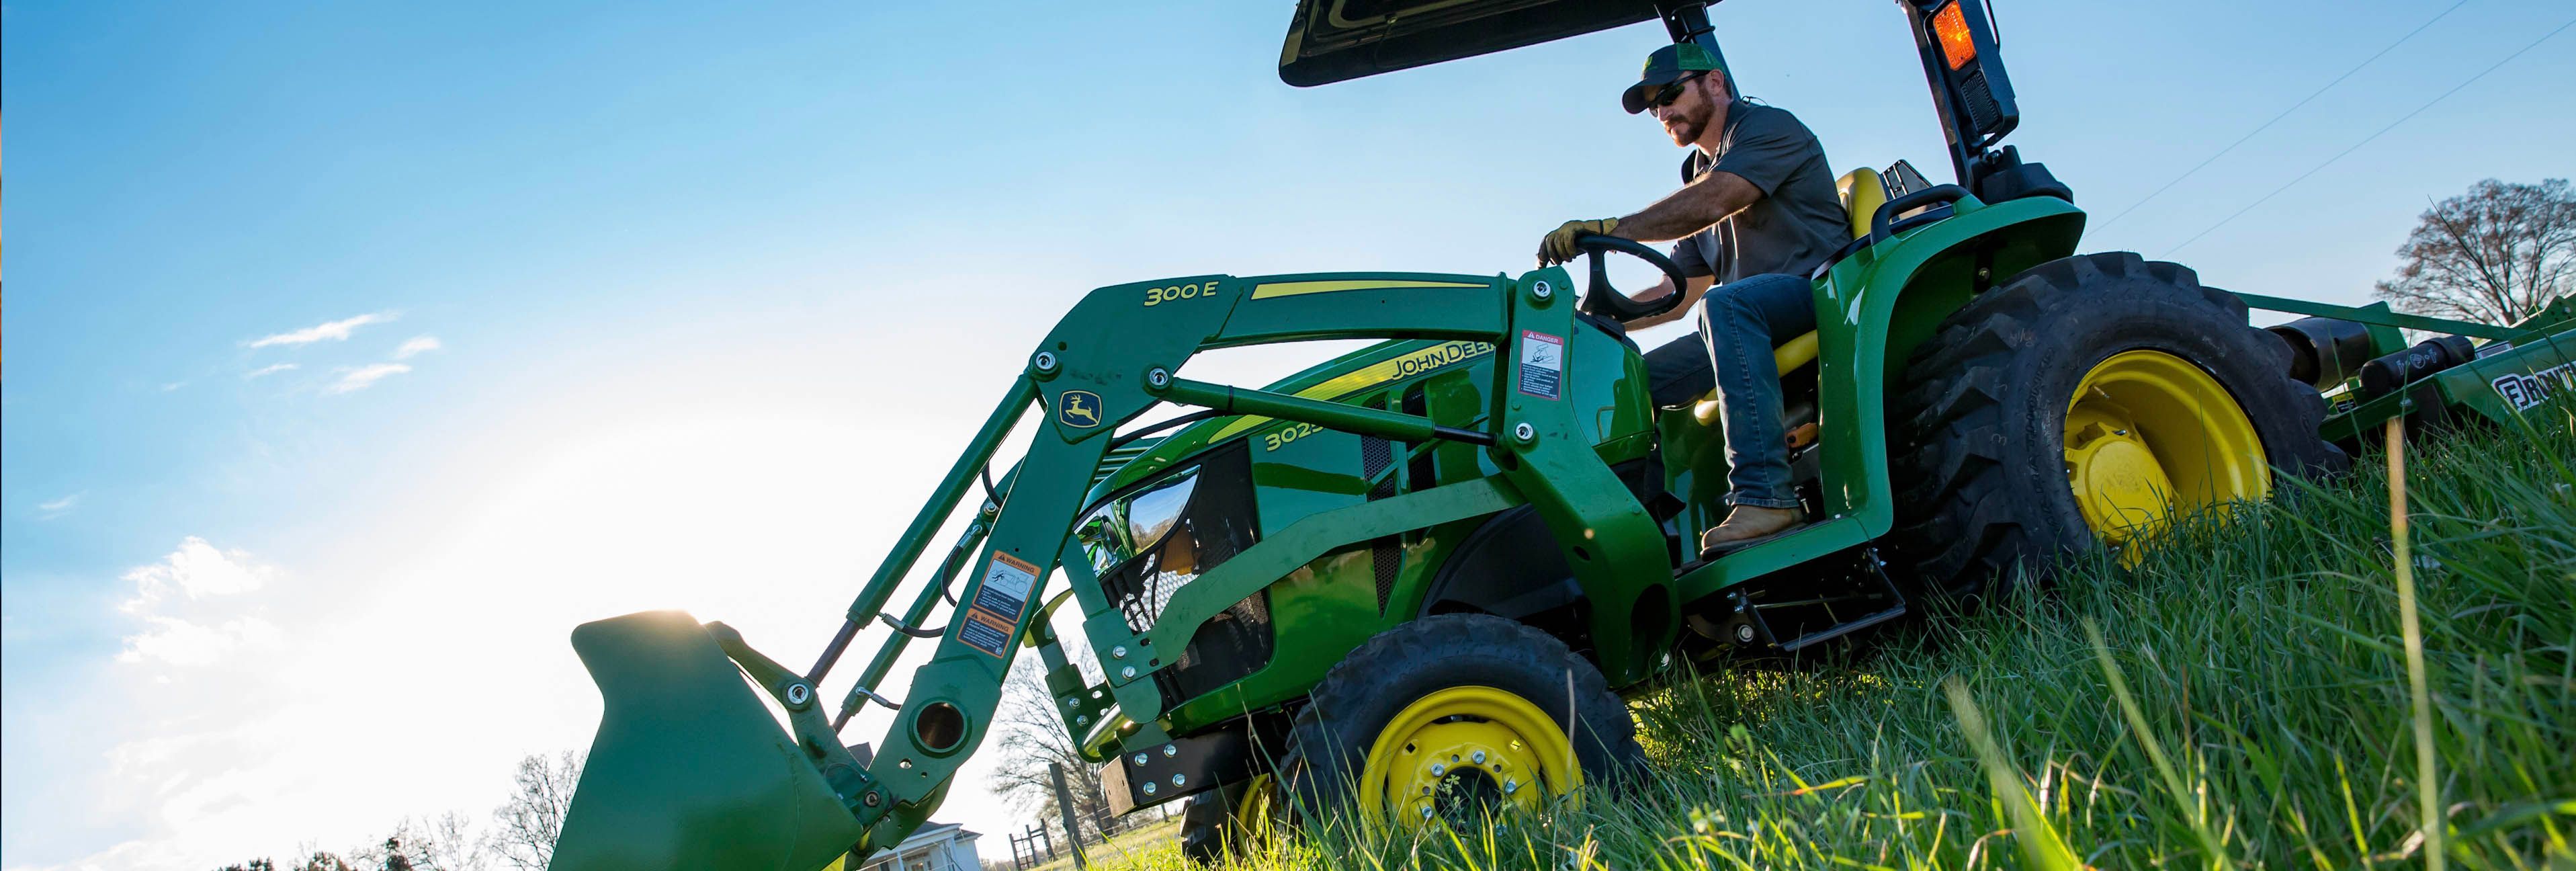 When You’re Hot, You’re Hot - Compact tractors ignite acreage imagination